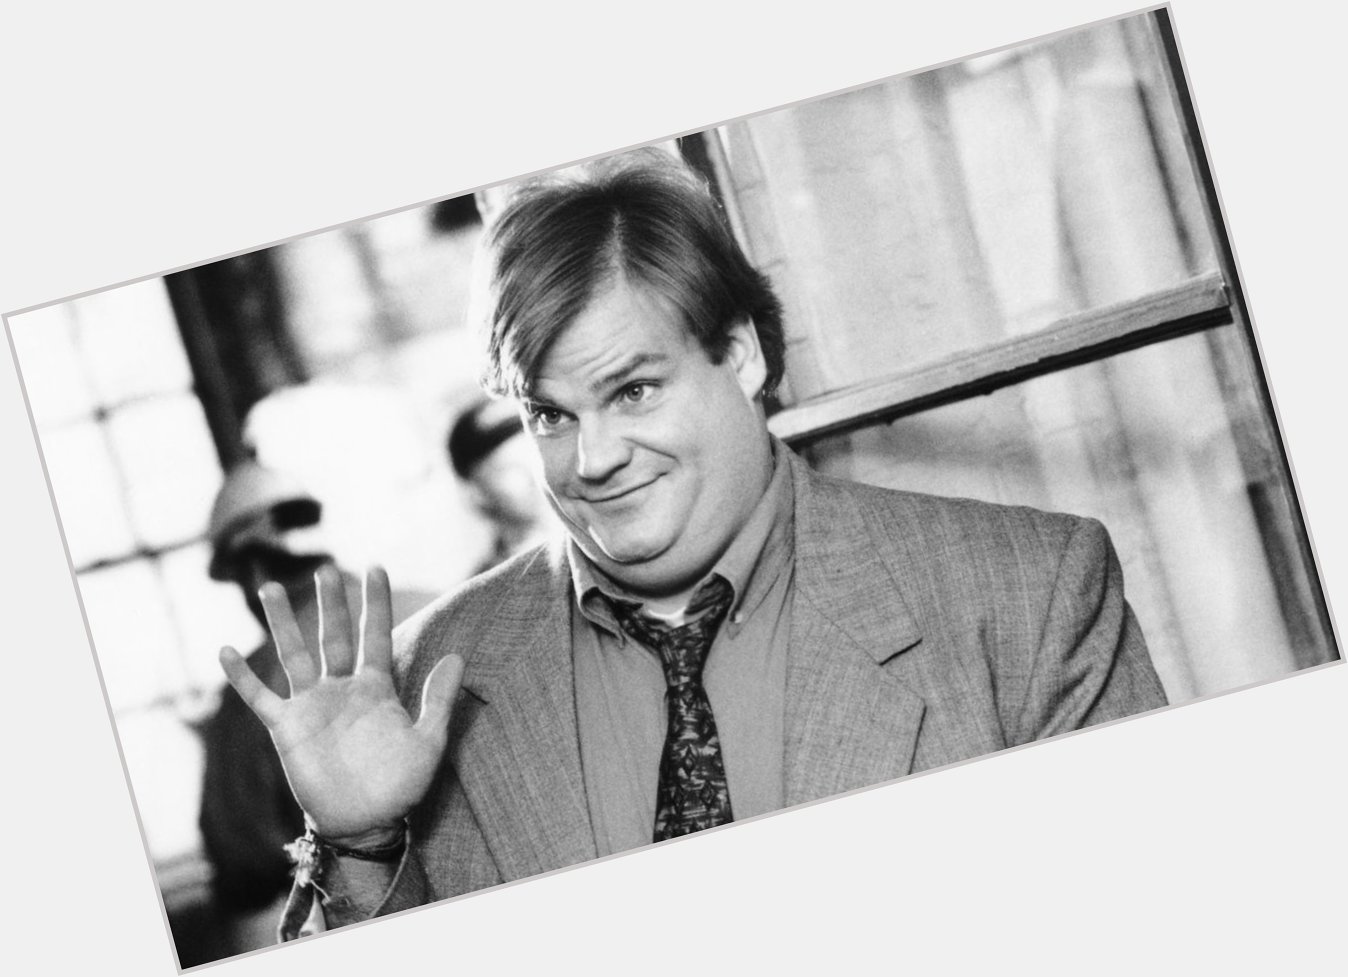 Chris Farley would\ve been 53 today. Happy Birthday to a comedy legend! 